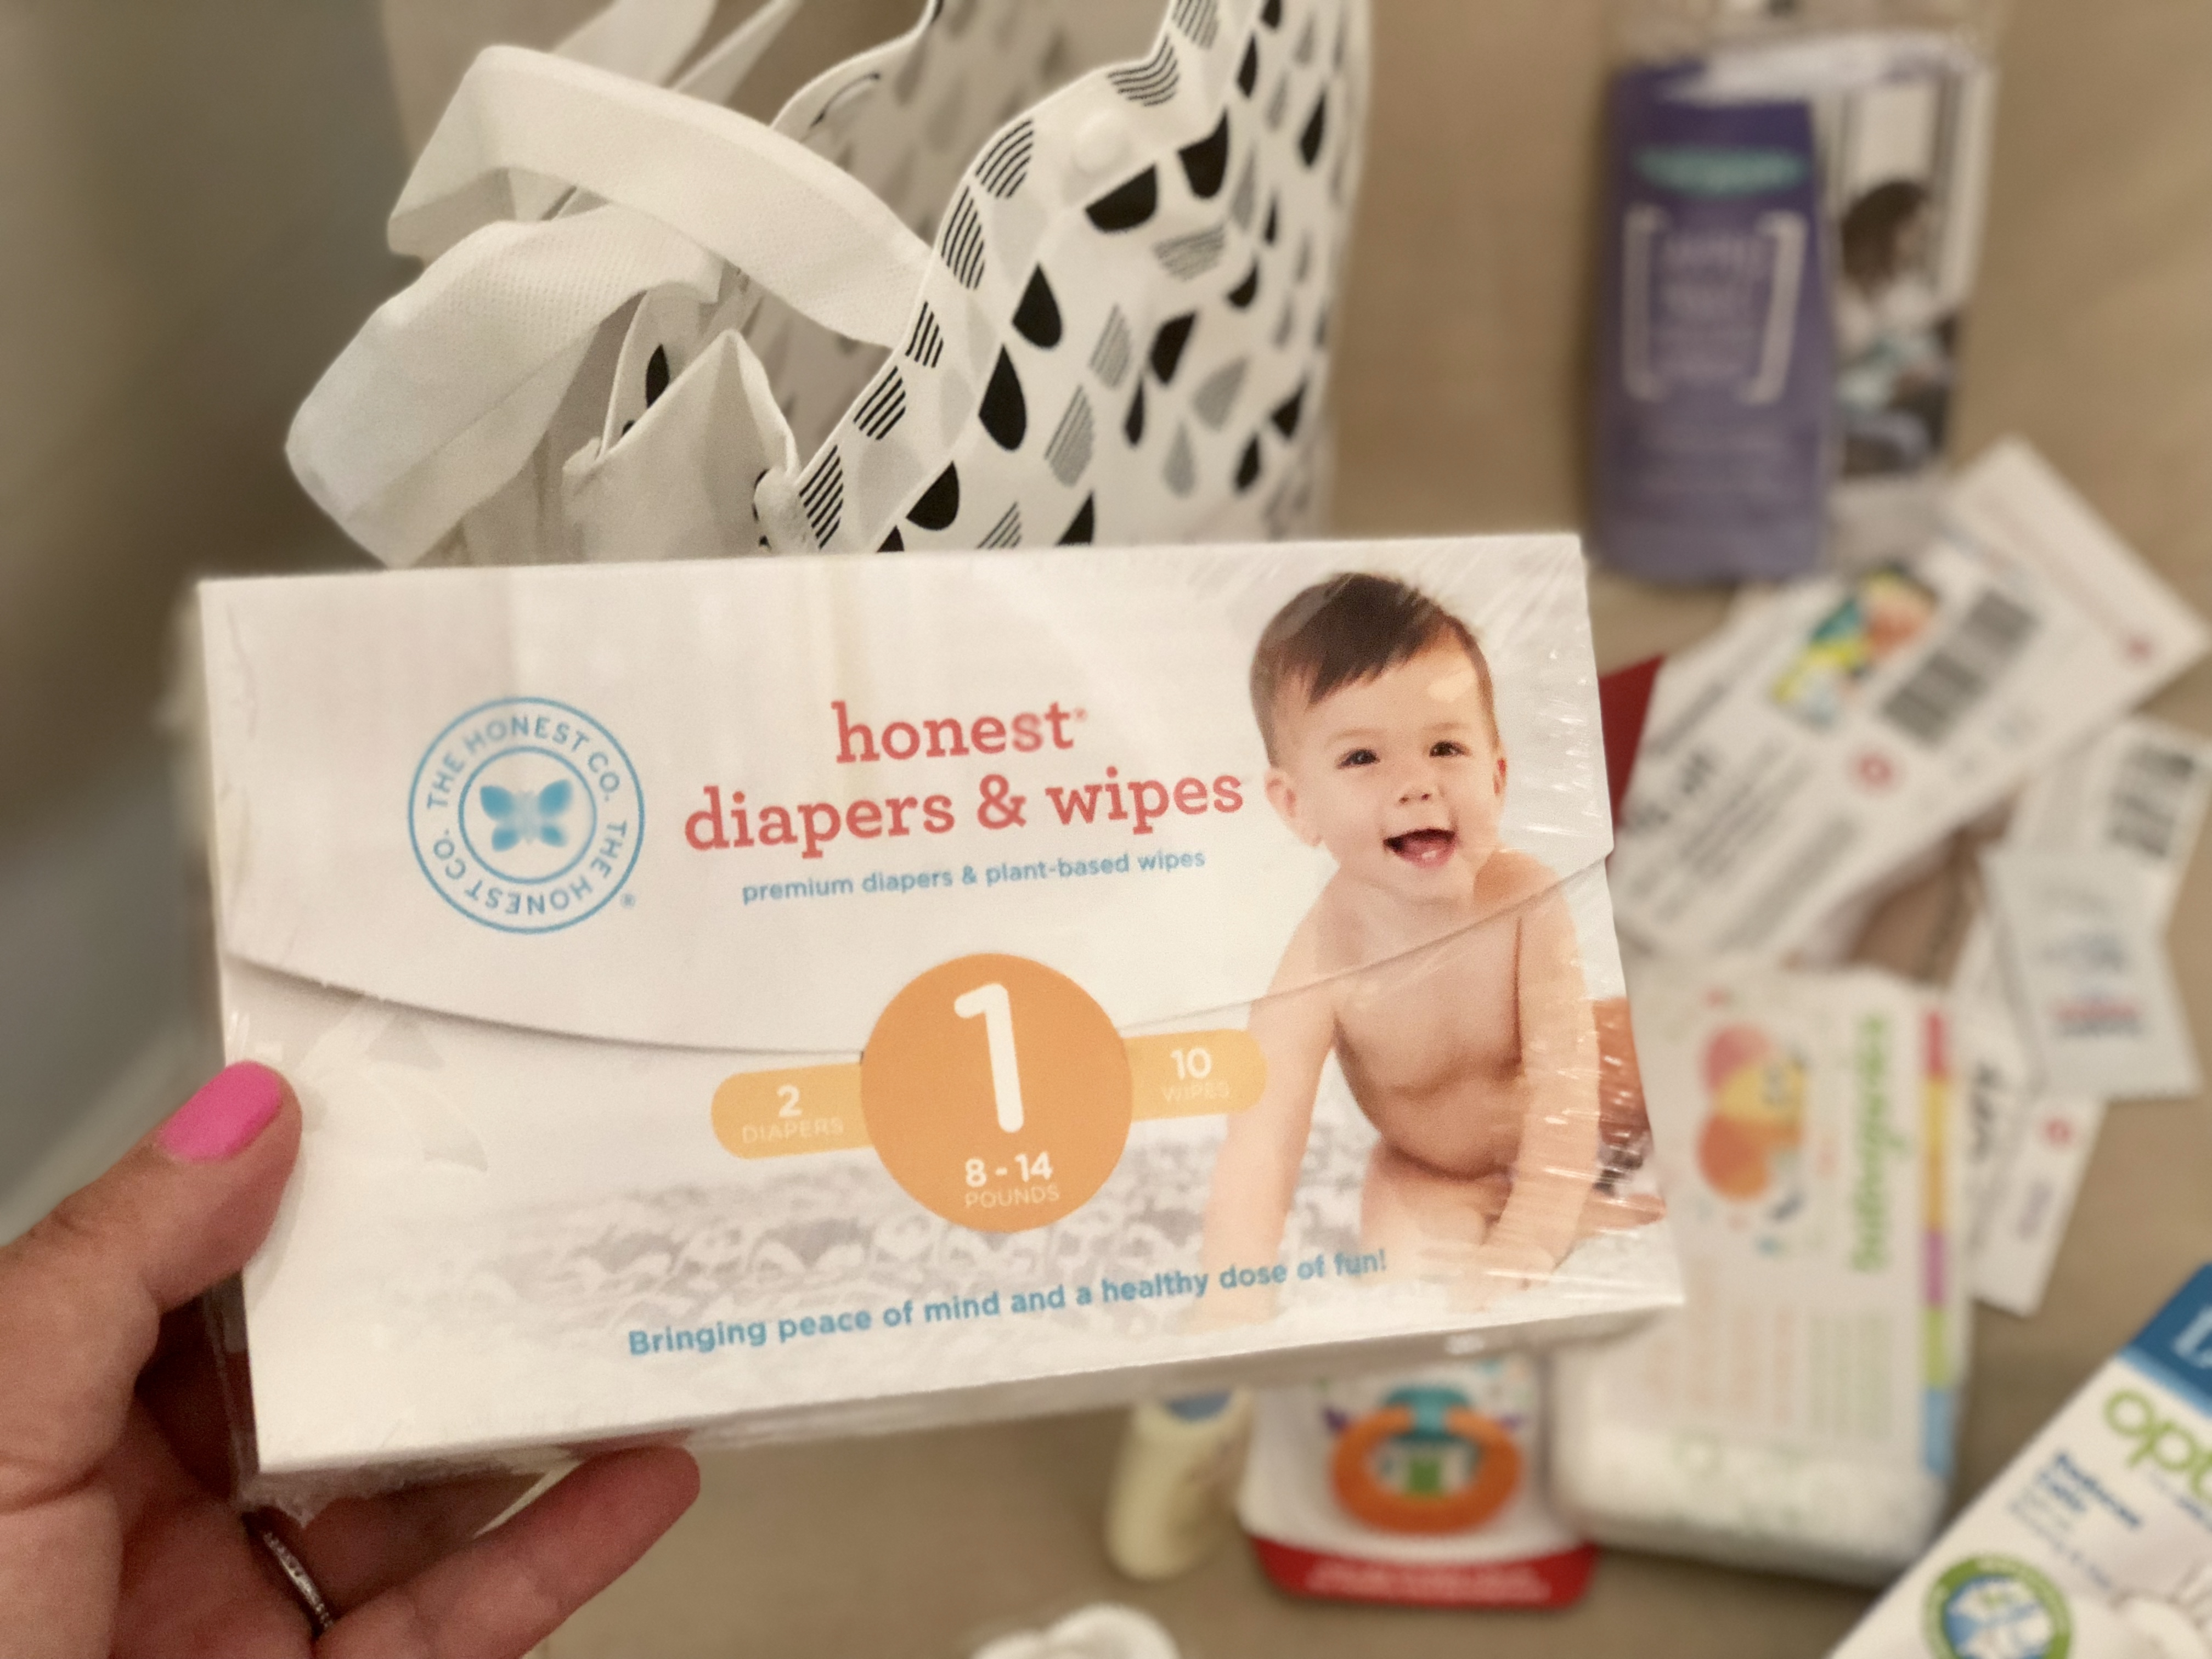 target baby registry bag with free gift coupons and samples - usually includes a wipes sample